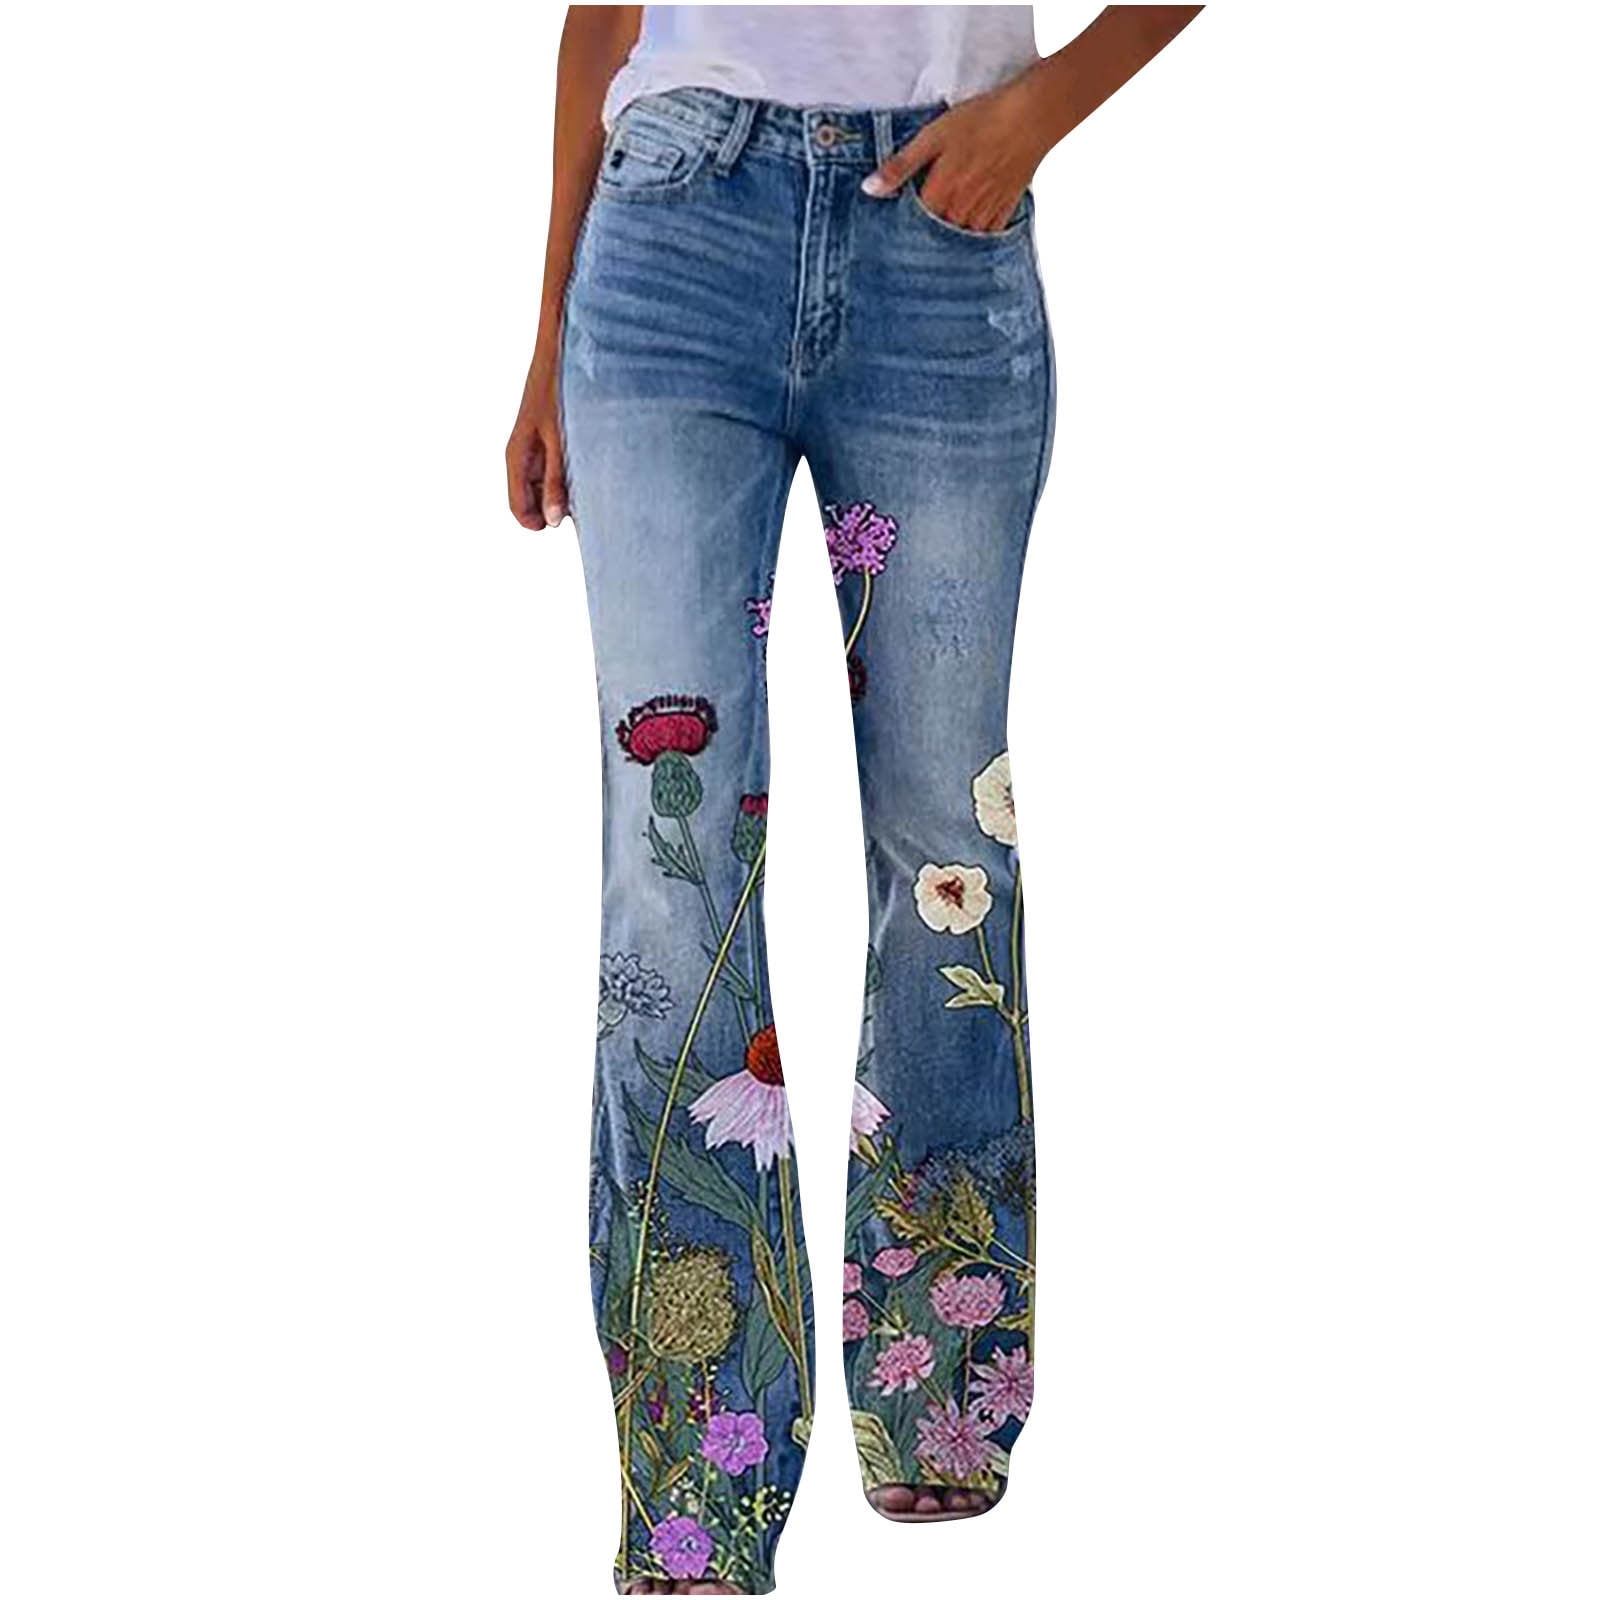 Womens Floral Lace Flare Jeans High Waisted Stretch Bell Bottom Jeans Boho  Bootcut Jean Denim Palazzo Pants 